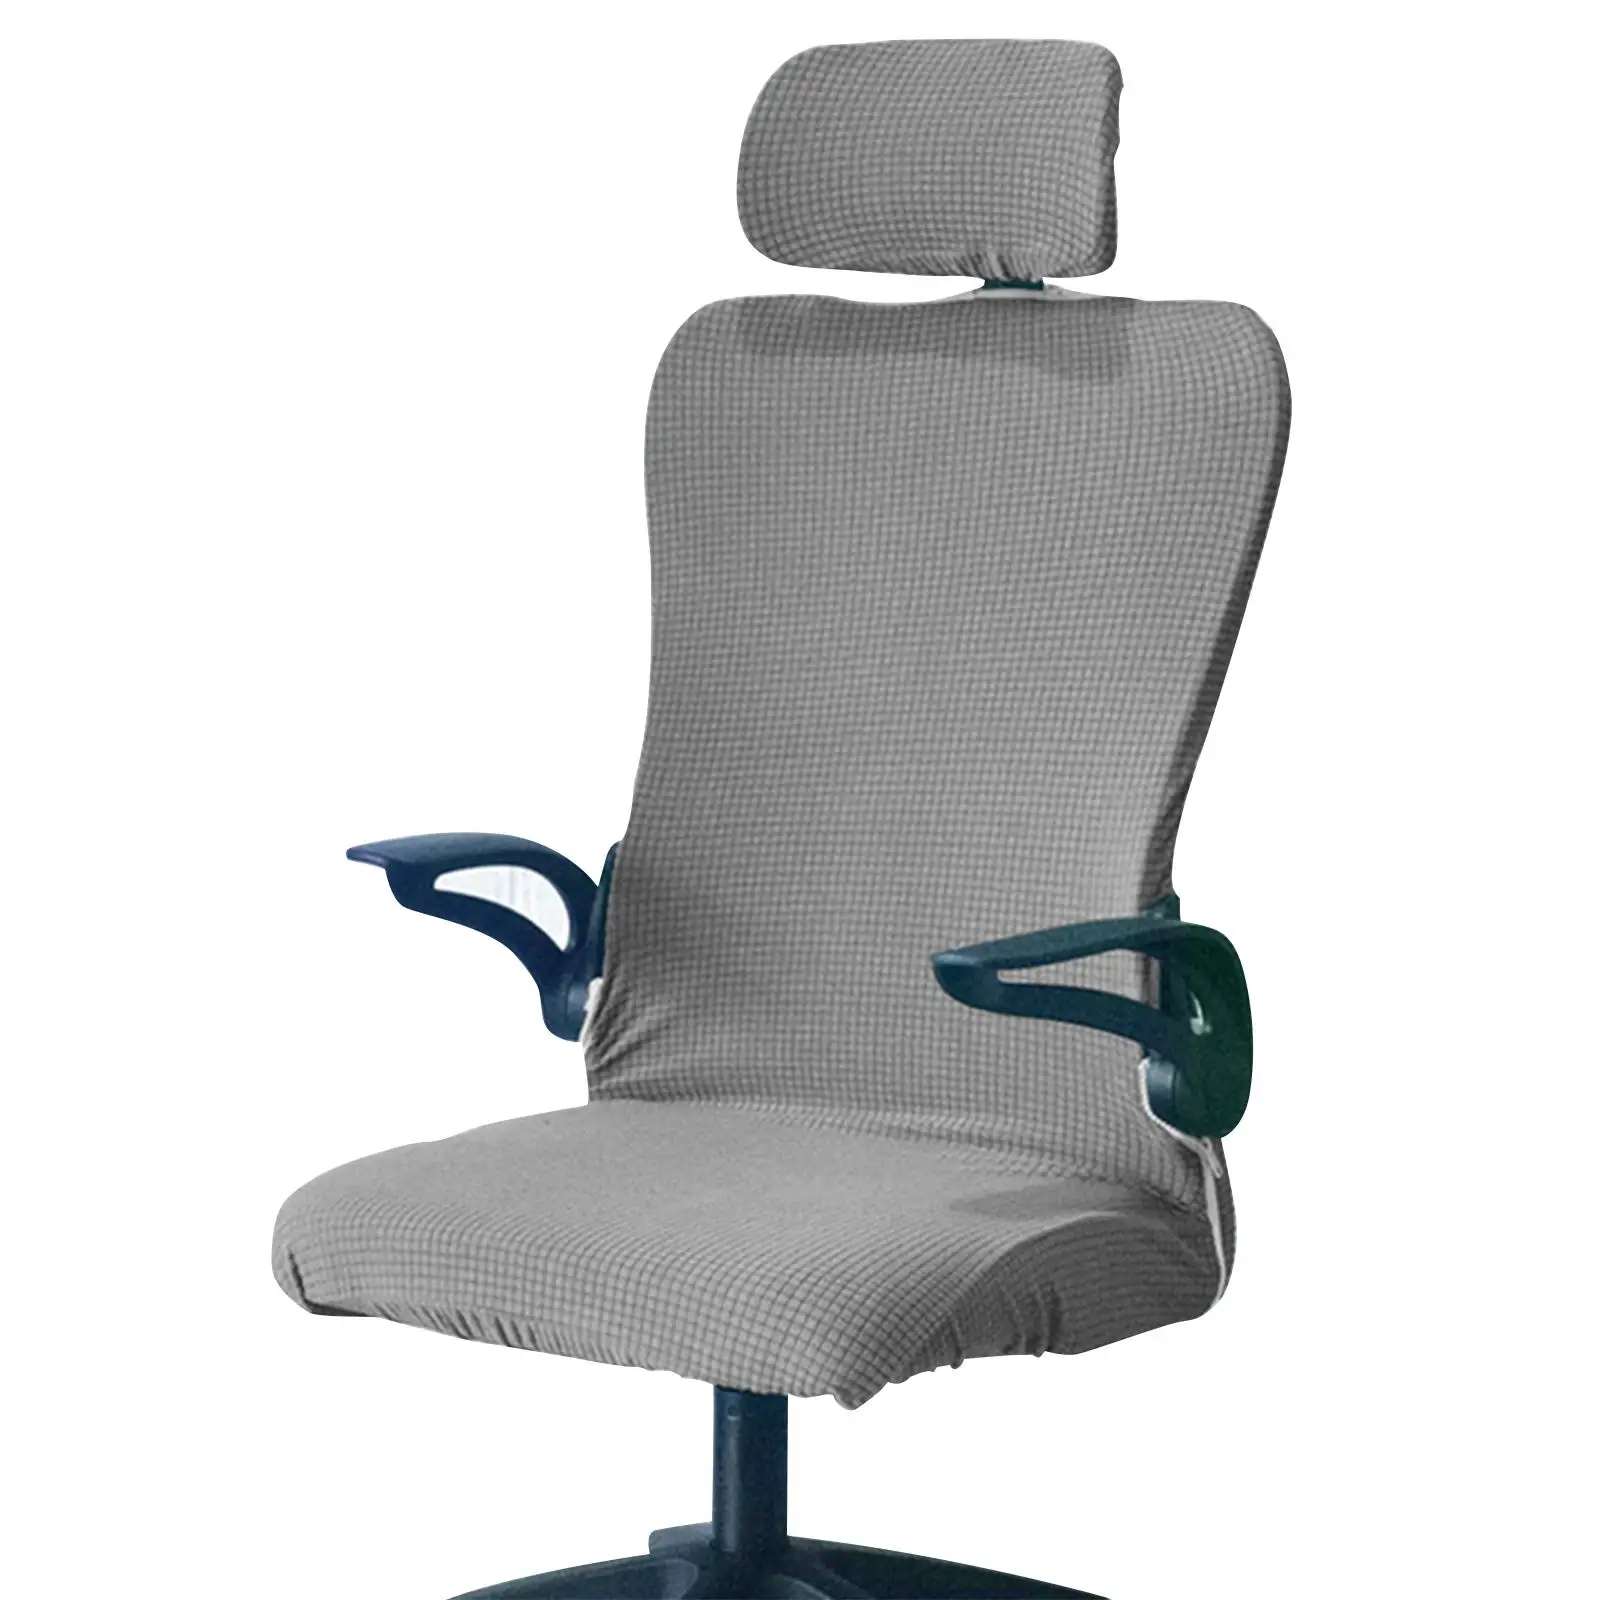 Office Chair Seat Covers with Headrest cover Chair Slipcovers Universal for Home Gaming Chair Swivel Computer Desk Chairs